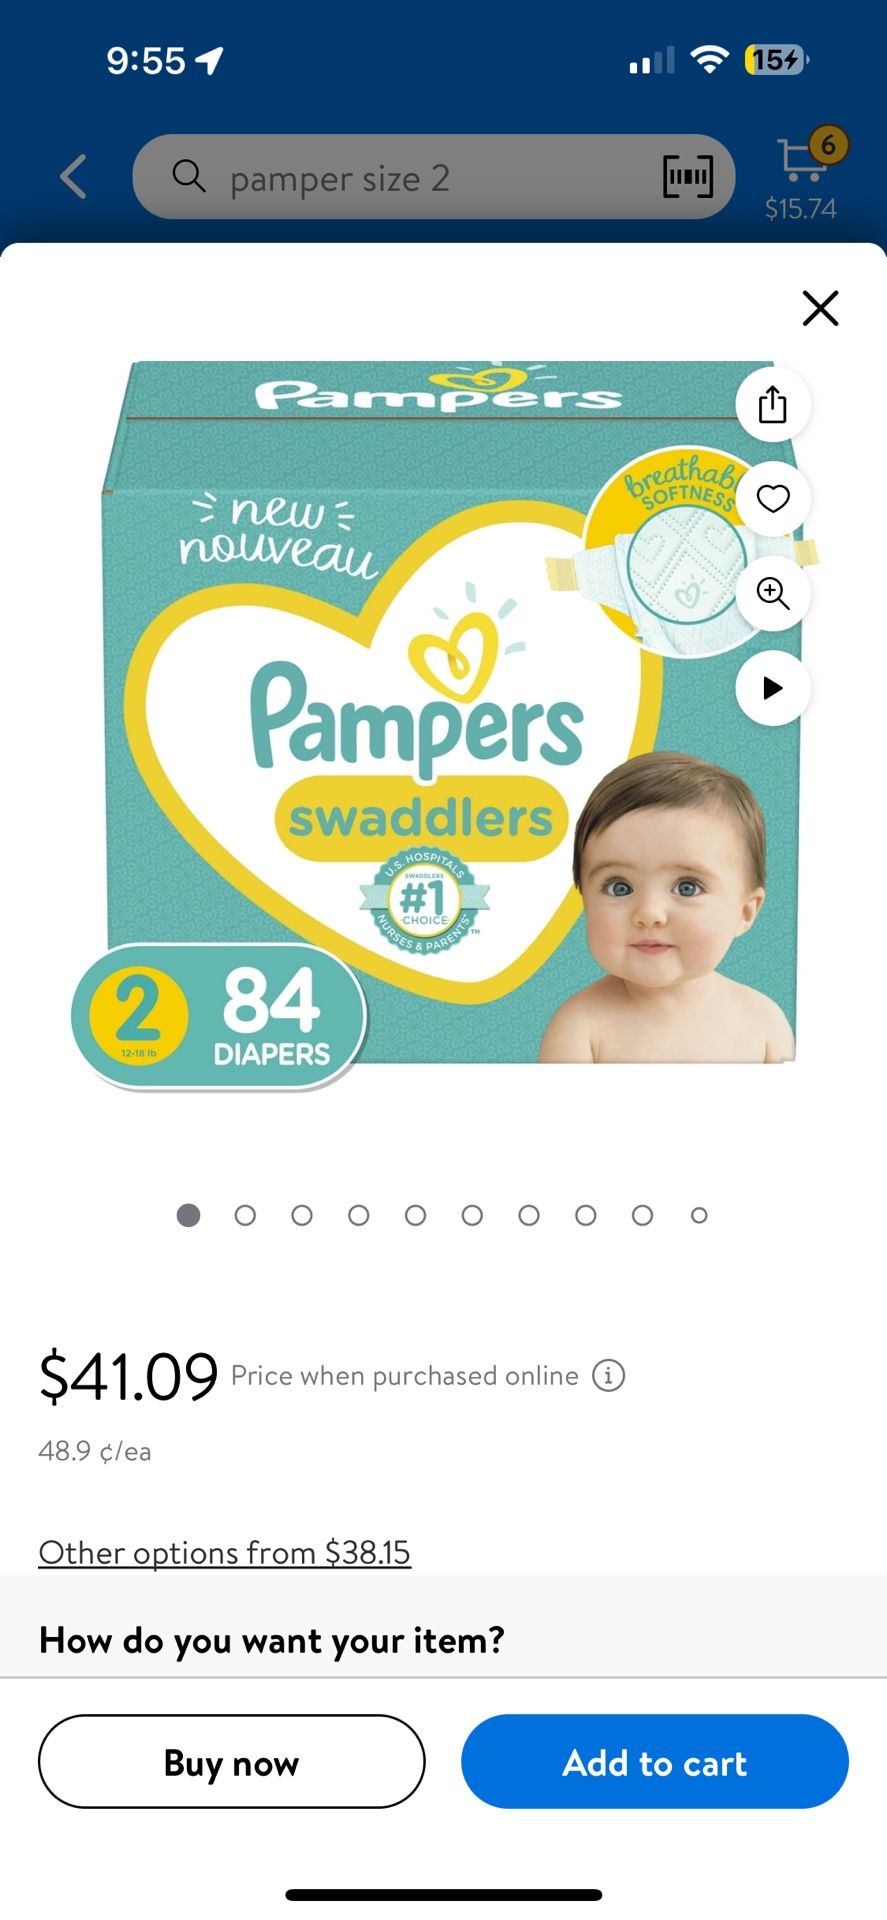 Diaper Pamper Size 1 And 2 $25ea